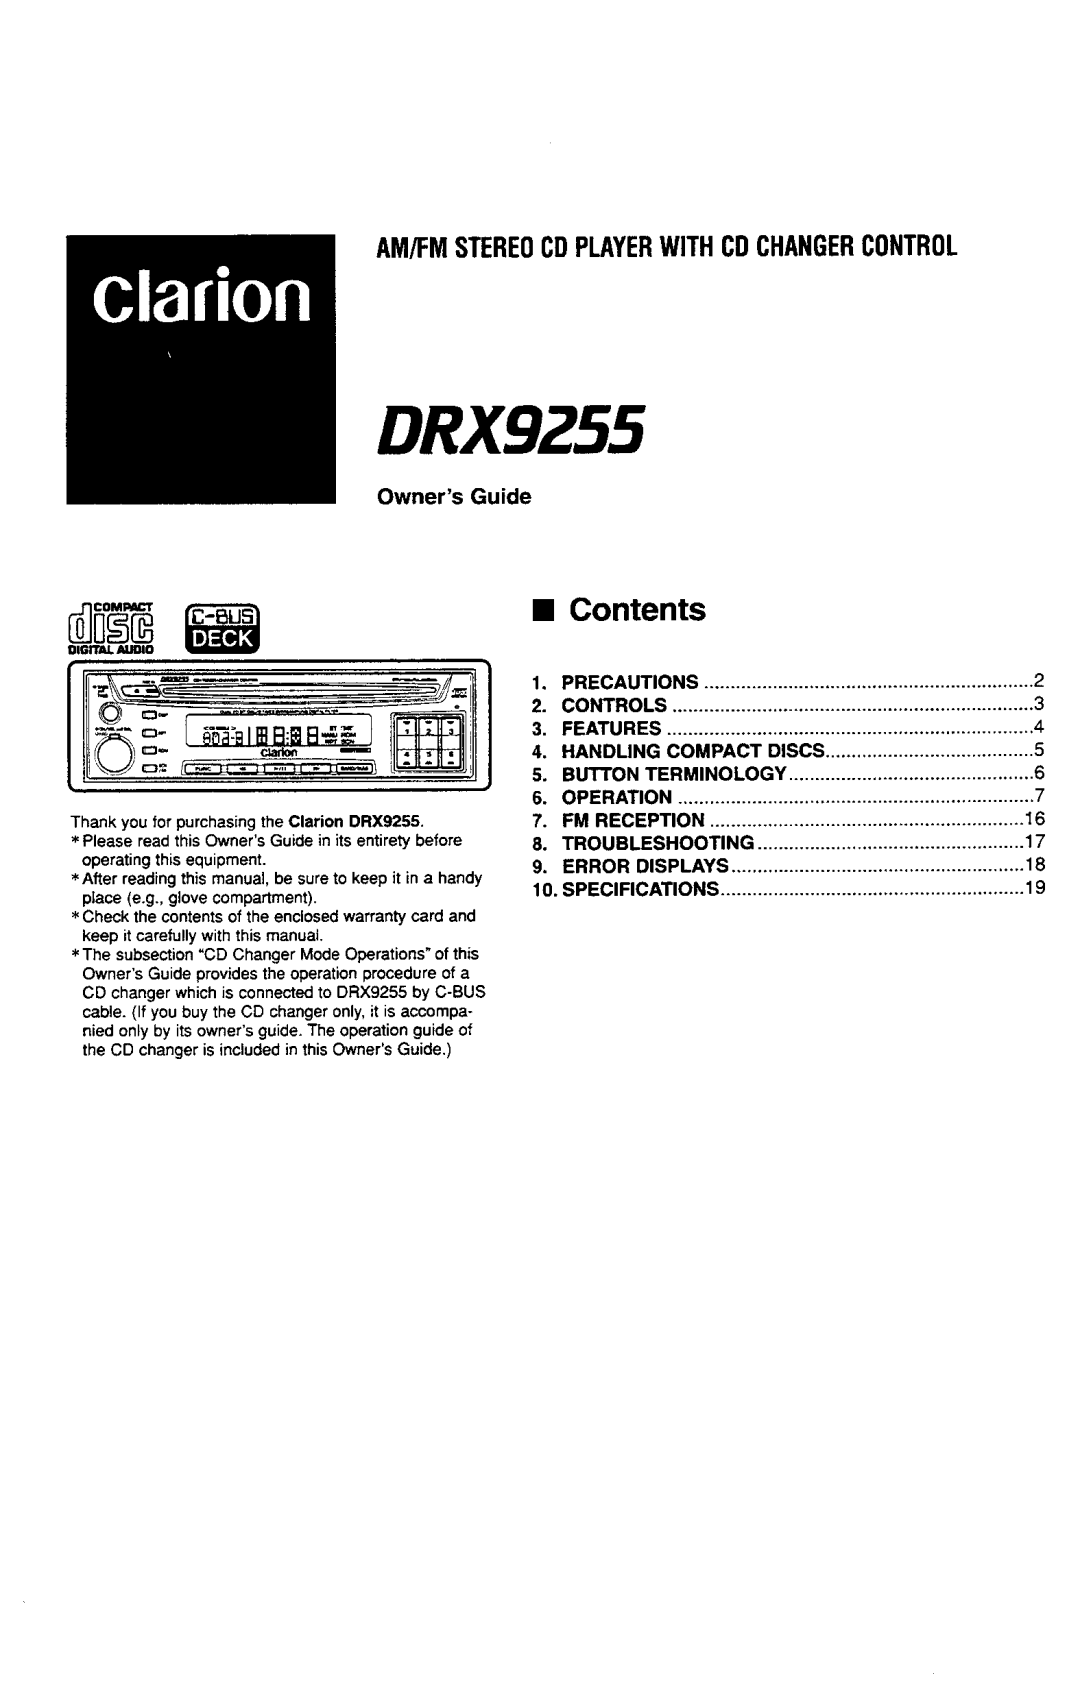 Clarion DRX9255 manual 